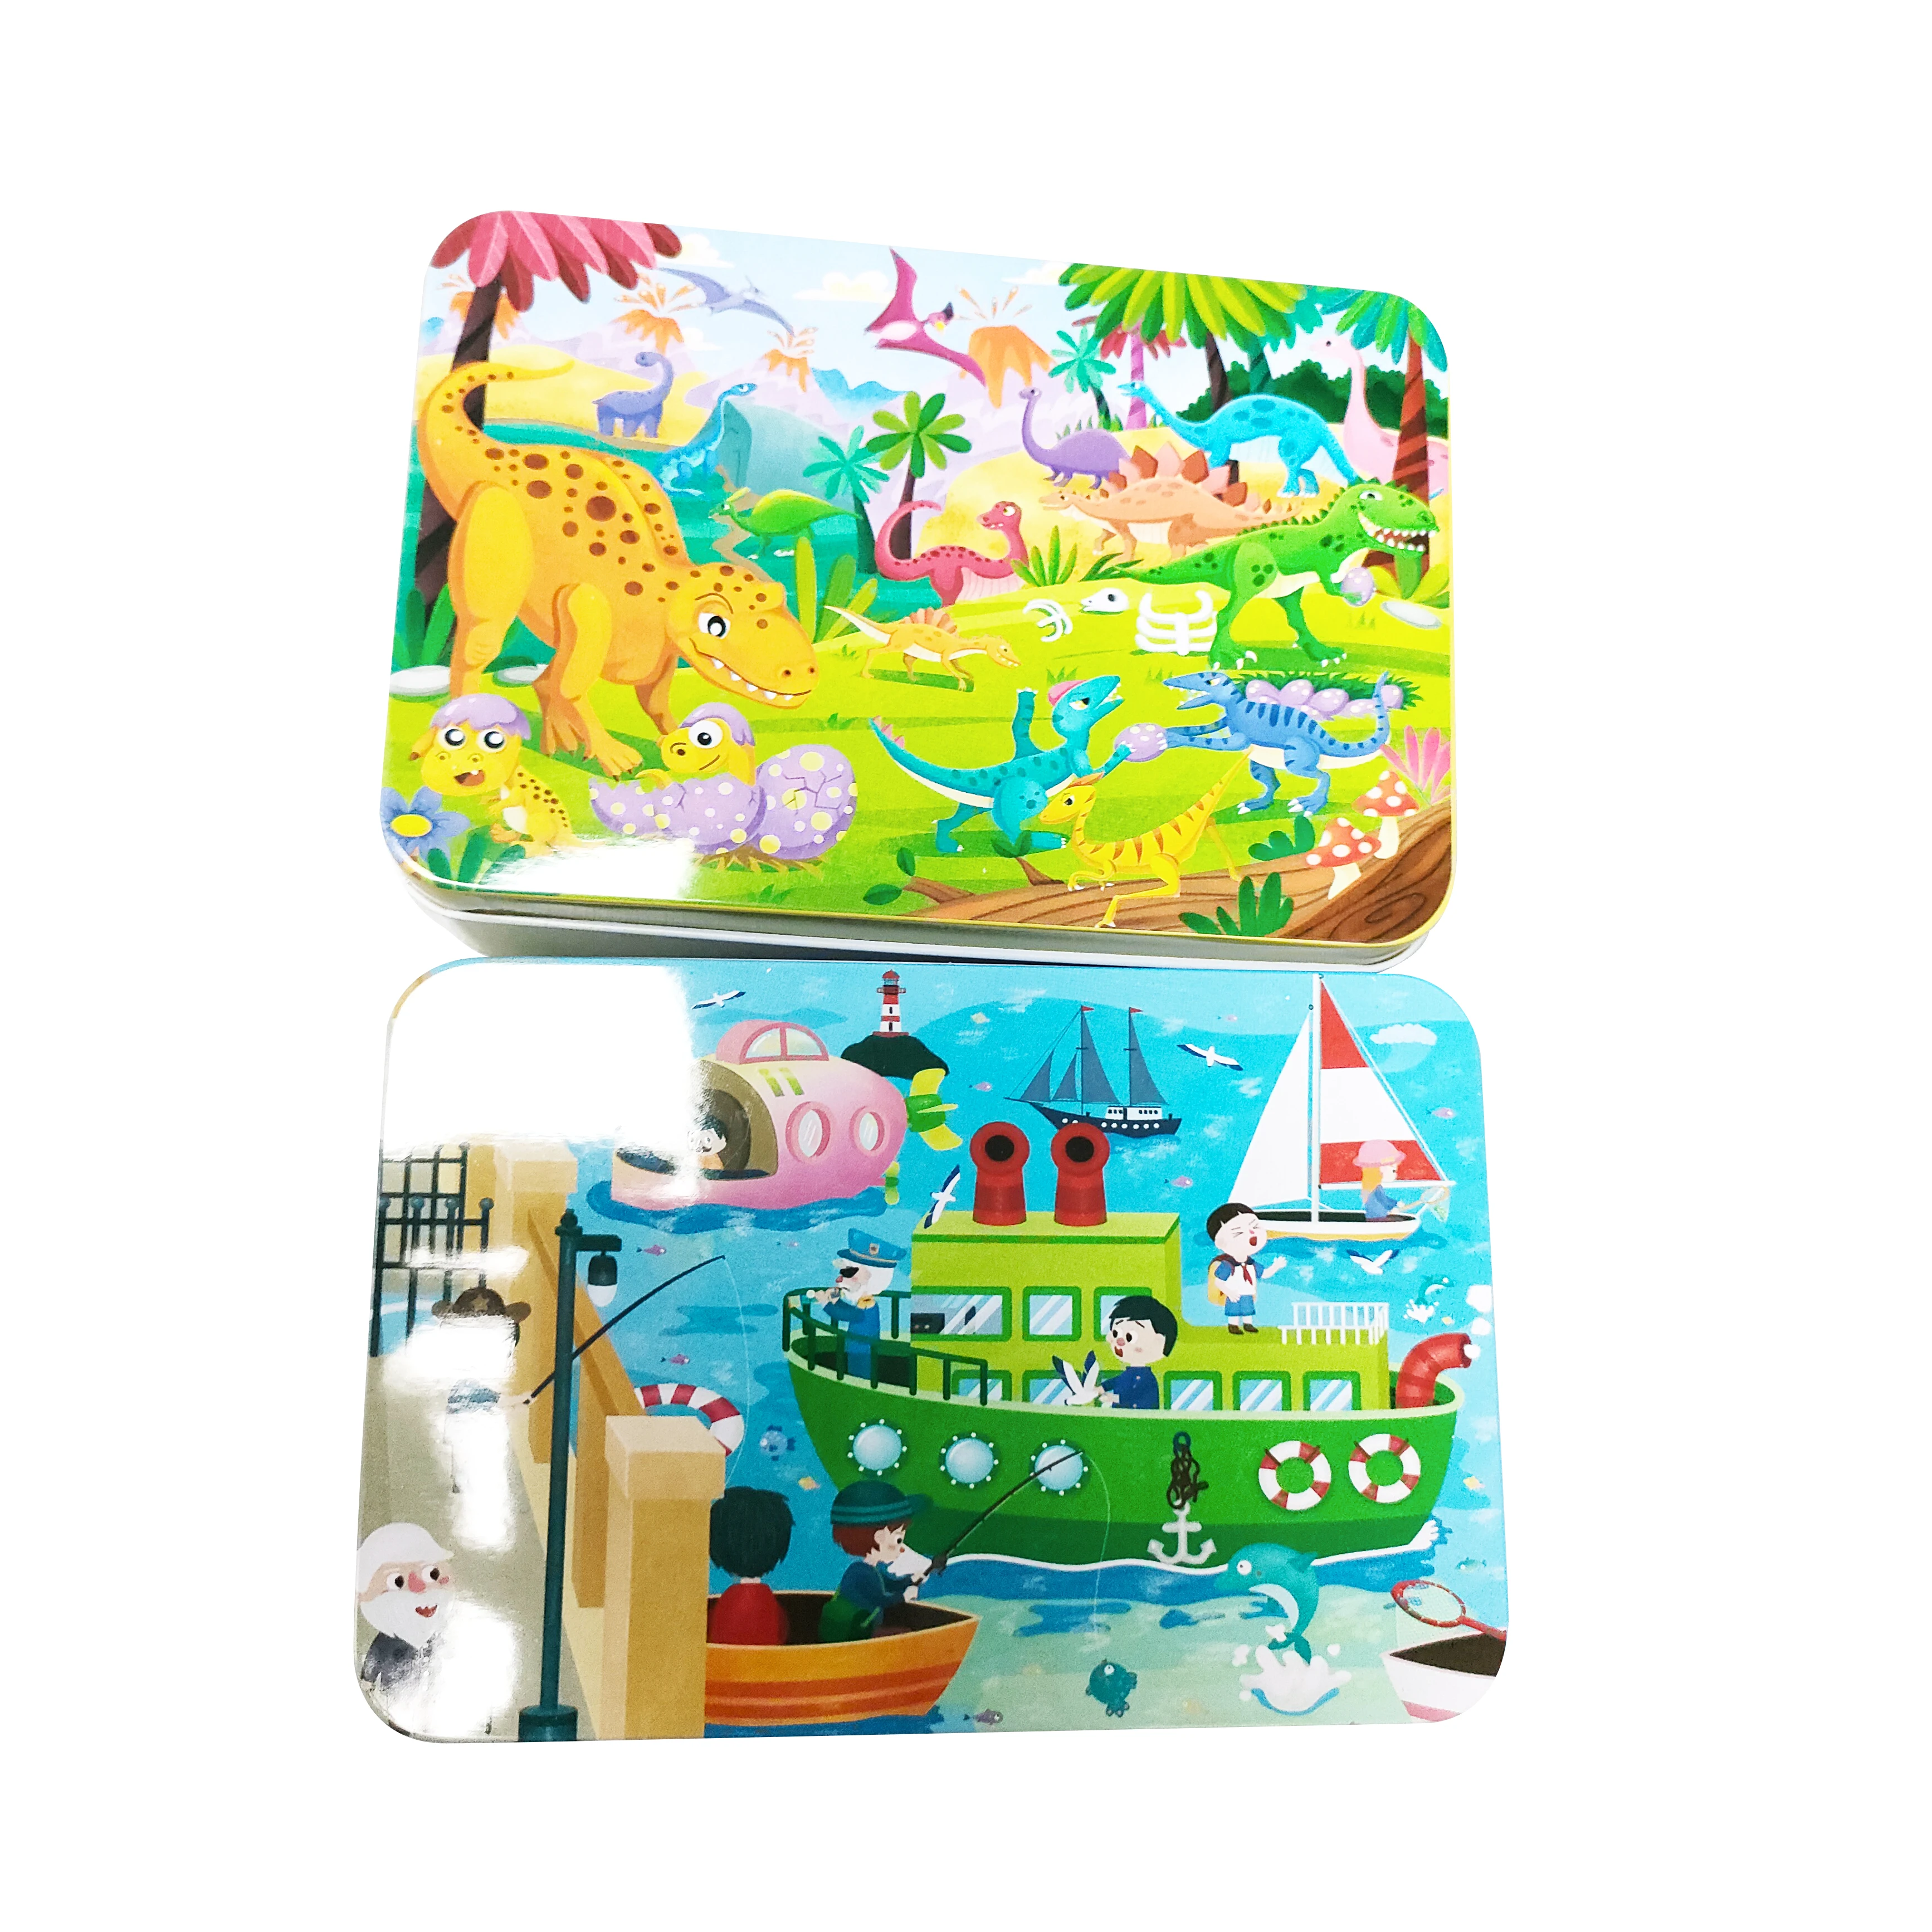 

Free Samples Customizable Cartoon Paper 24/40/300 Large Pieces Jigsaw Puzzle Games For Kids Gift